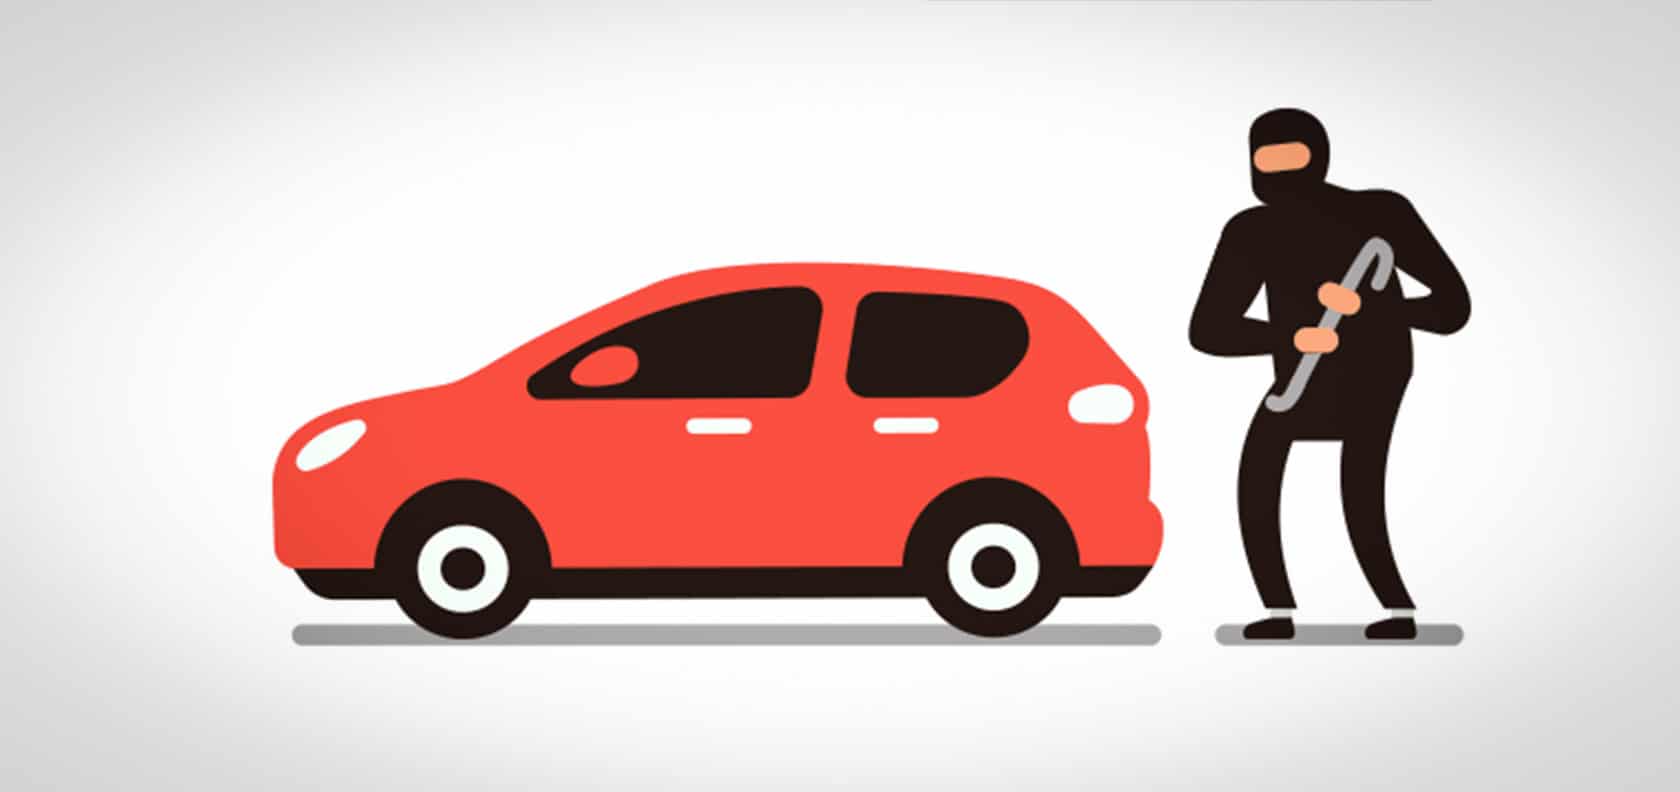 Illustration of a thief dressed in black stealing a red parked car.